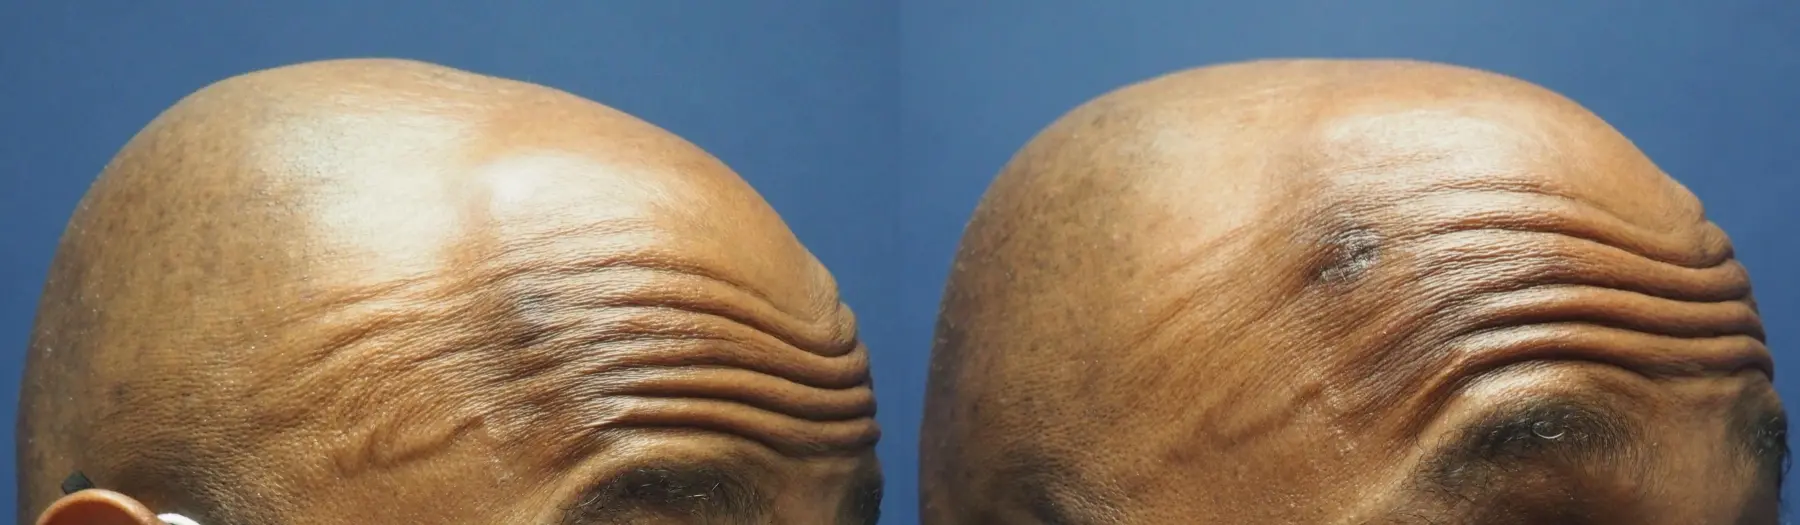 Mole Or Age Spot Removal: Patient 3 - Before and After 2